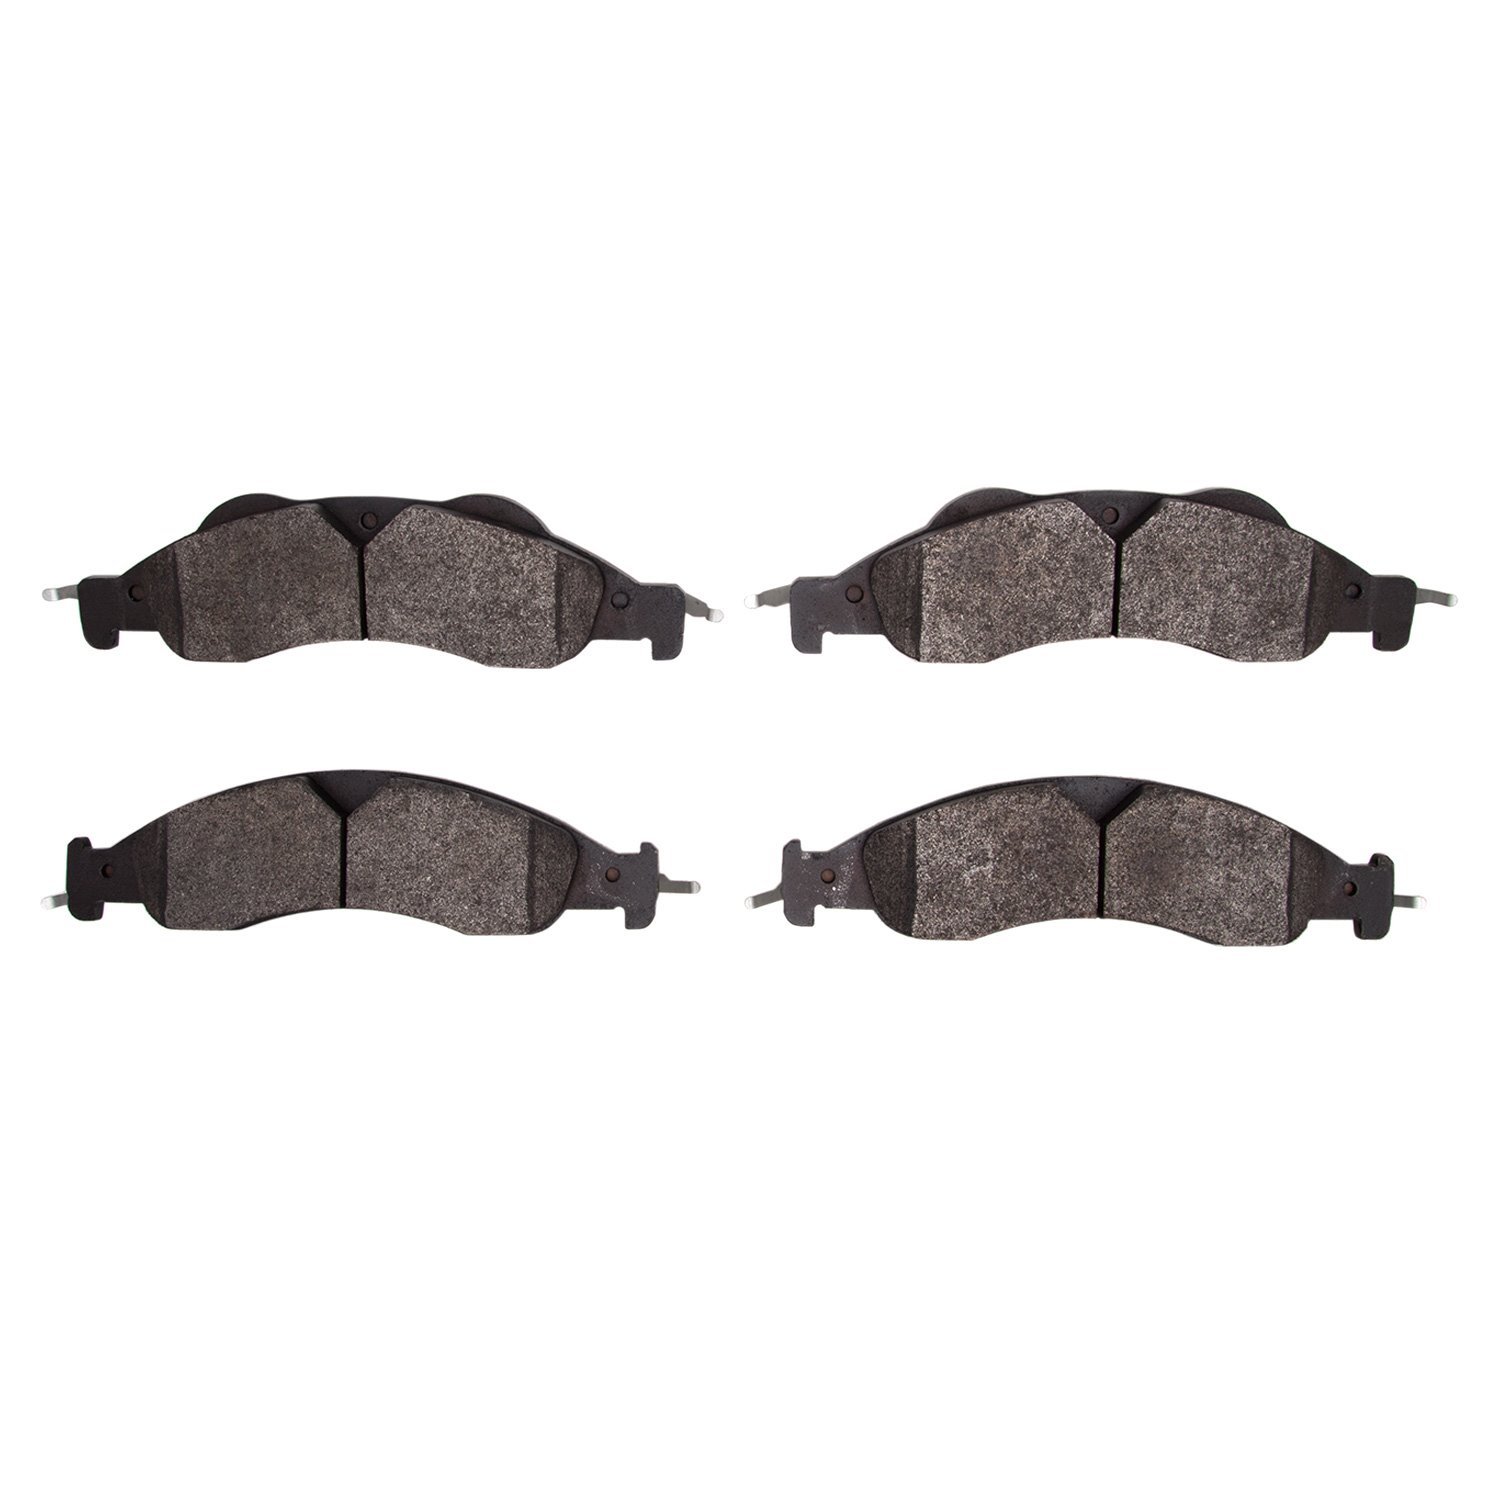 Super-Duty Brake Pads, 2007-2009 Ford/Lincoln/Mercury/Mazda, Position: Front